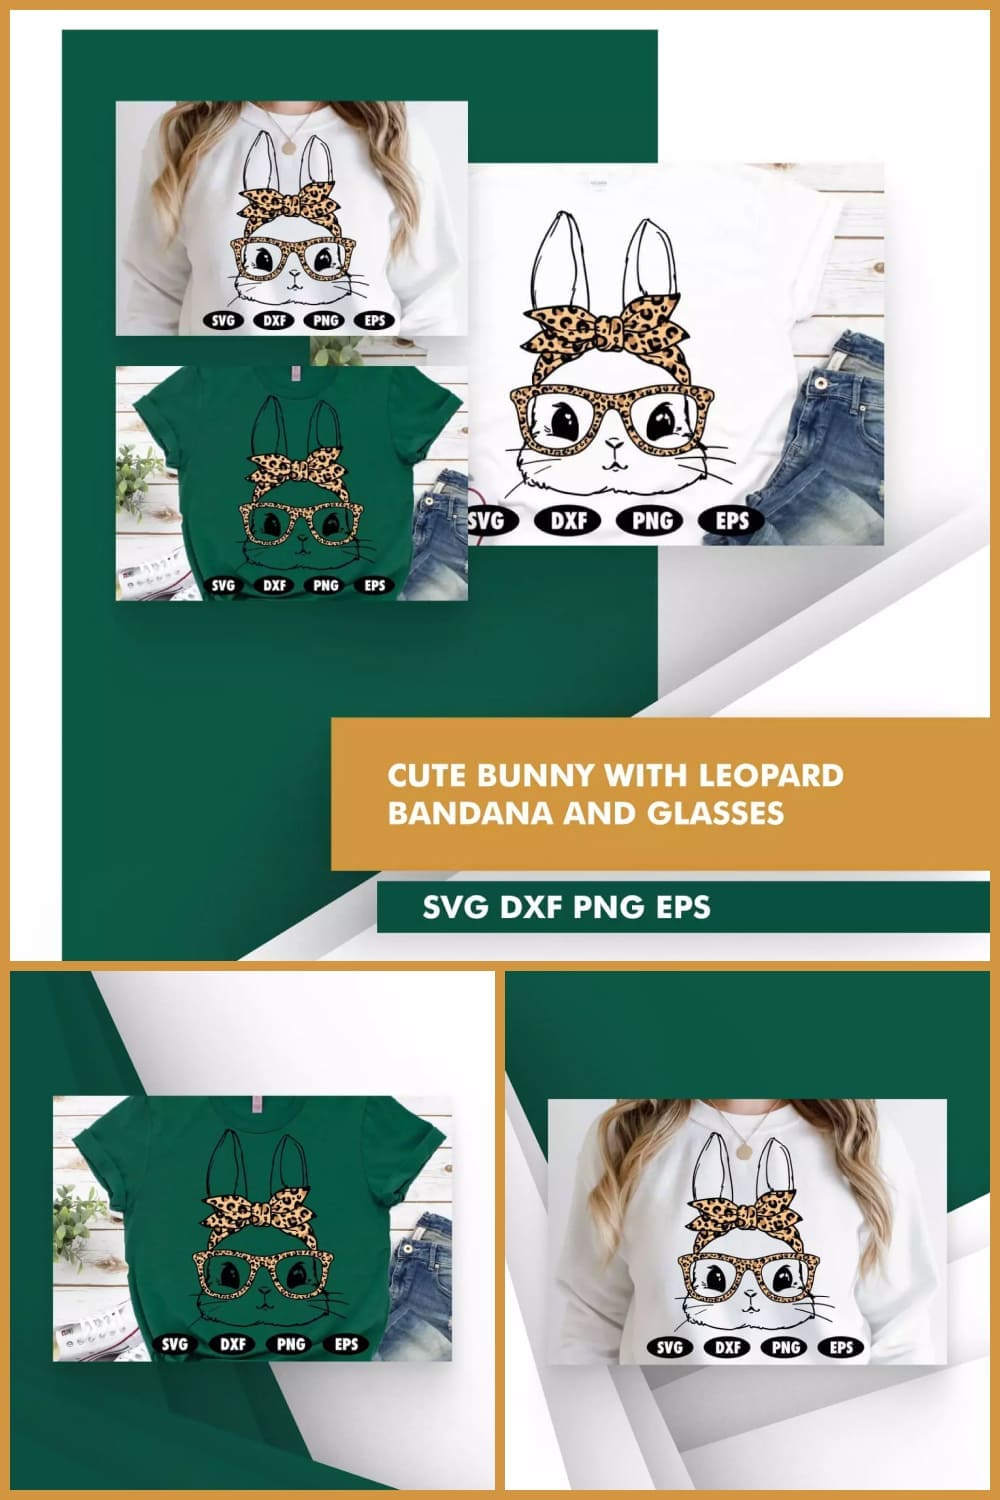 Cute Bunny with Leopard Bandana and Glasses SVG.